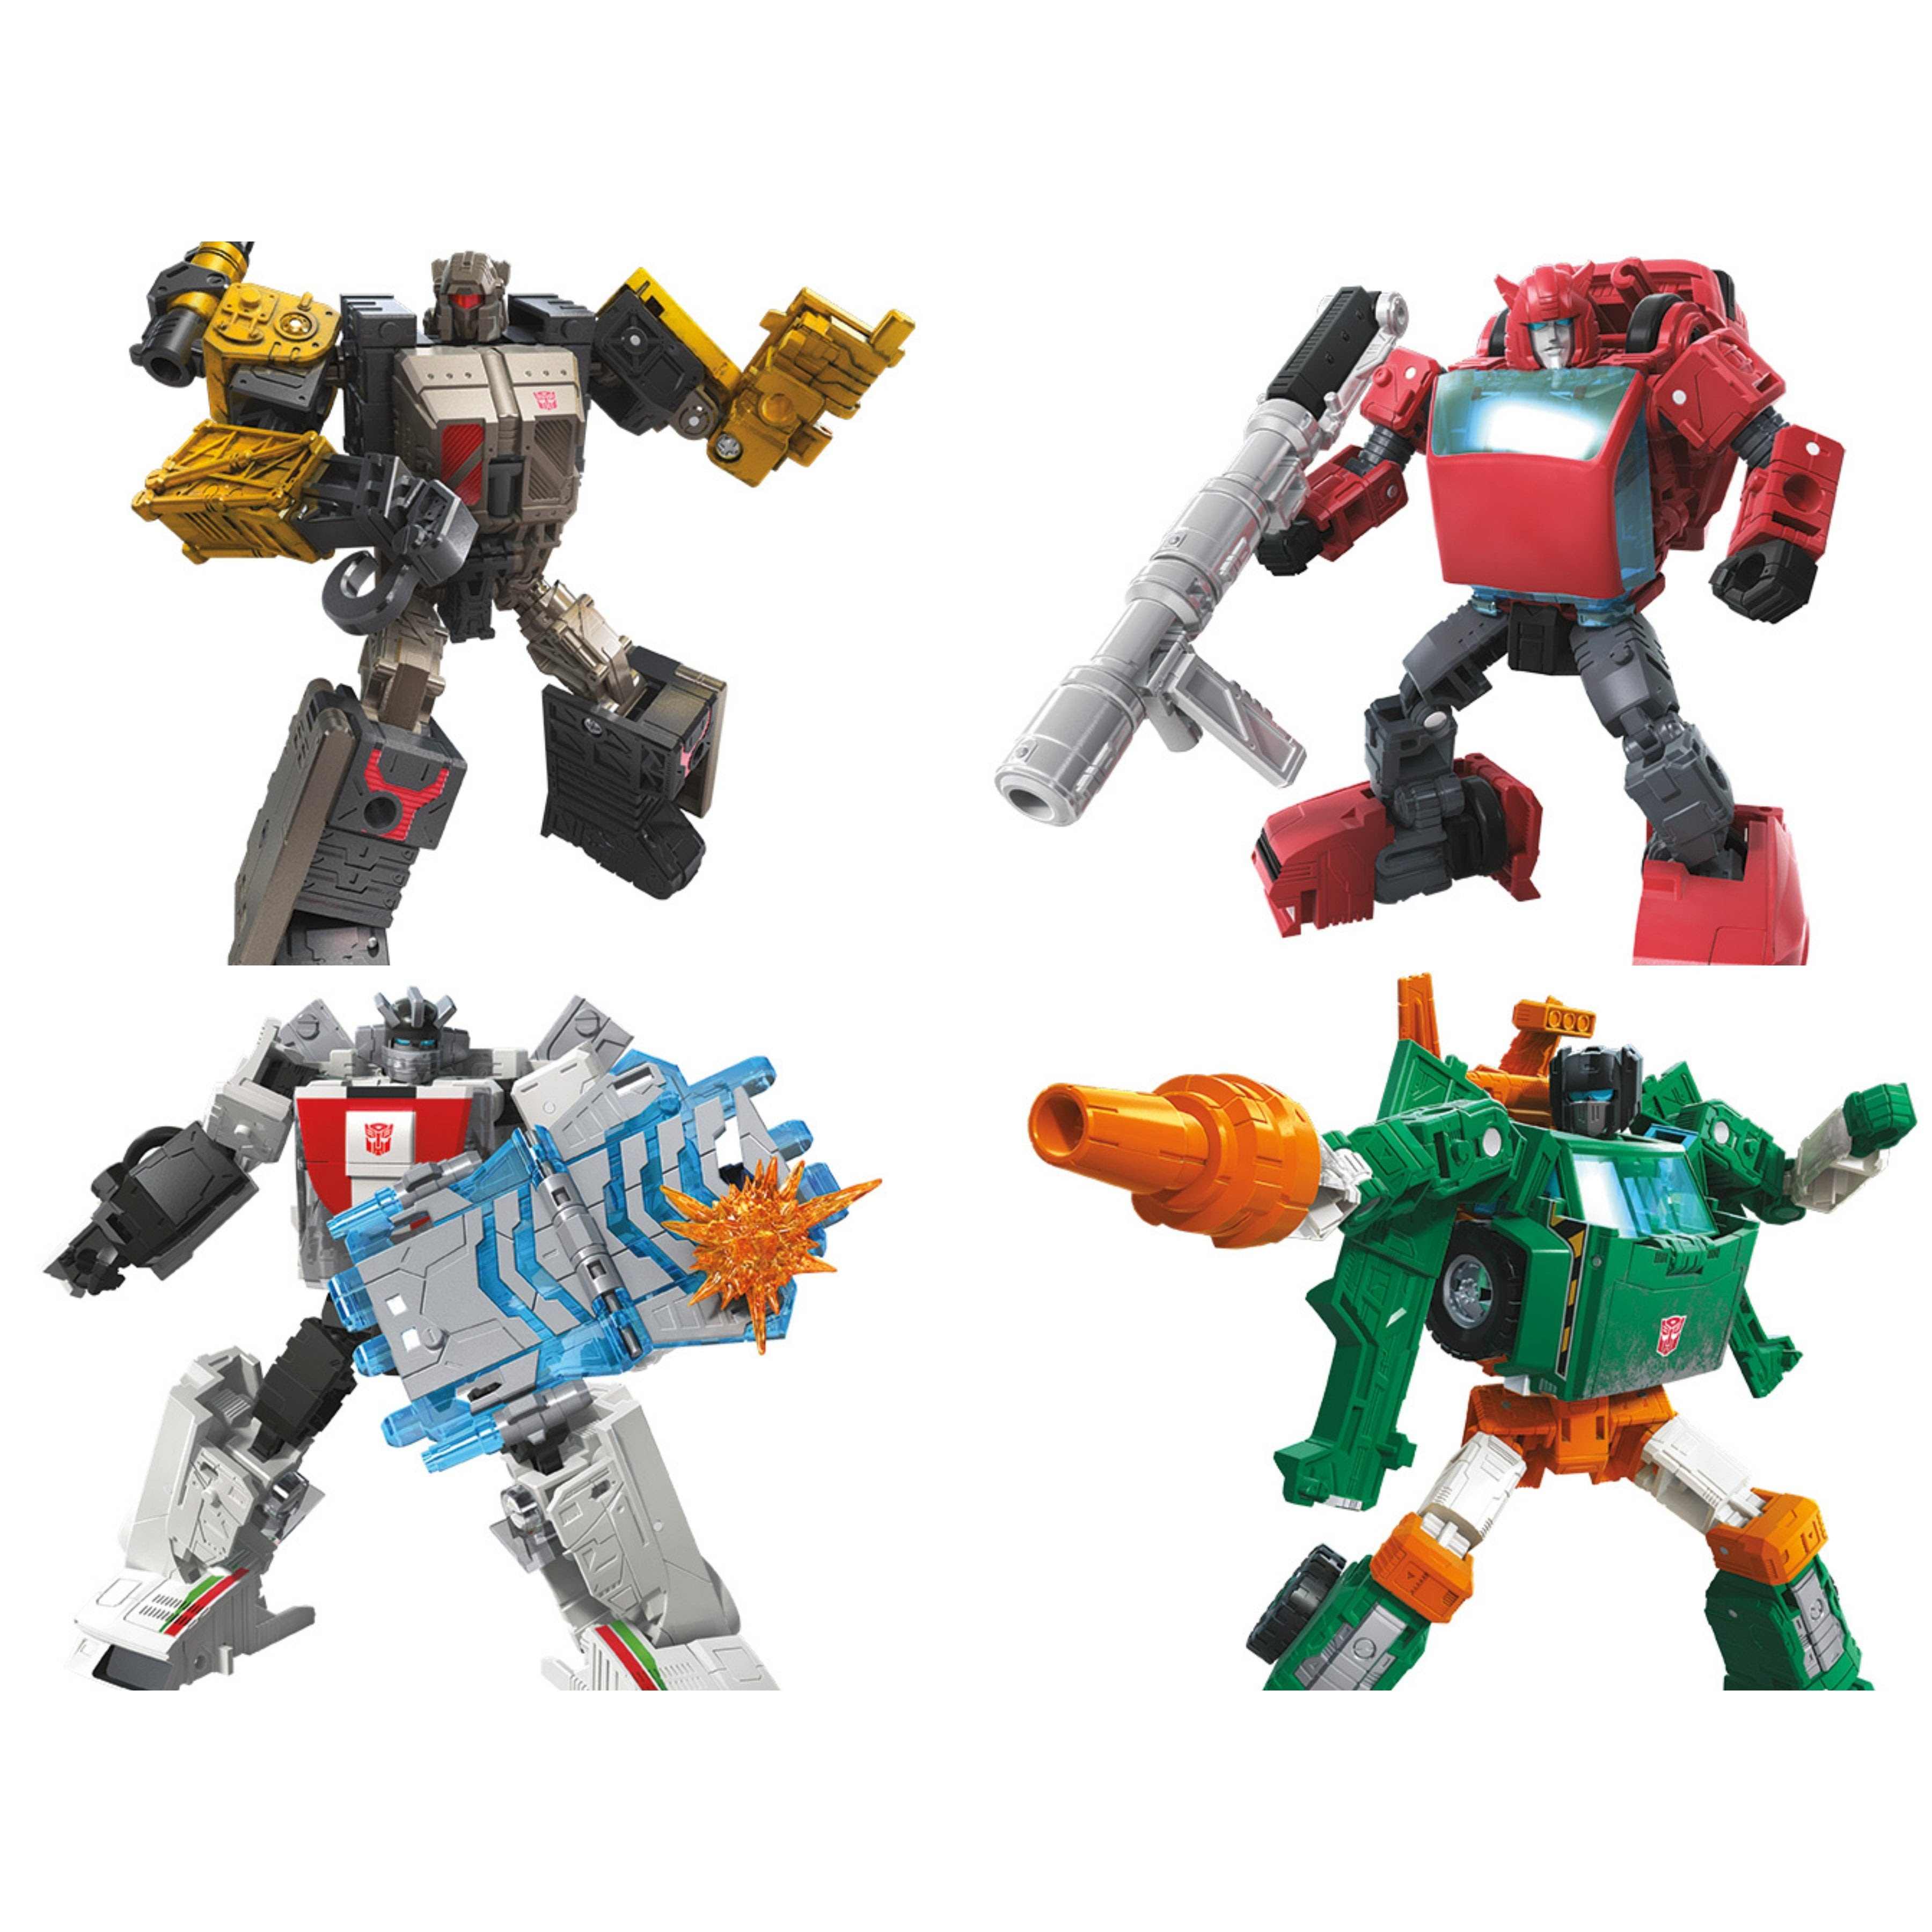 Image of Transformers Generations War For Cybertron Earthrise Deluxe Wave 1 - Set of 4